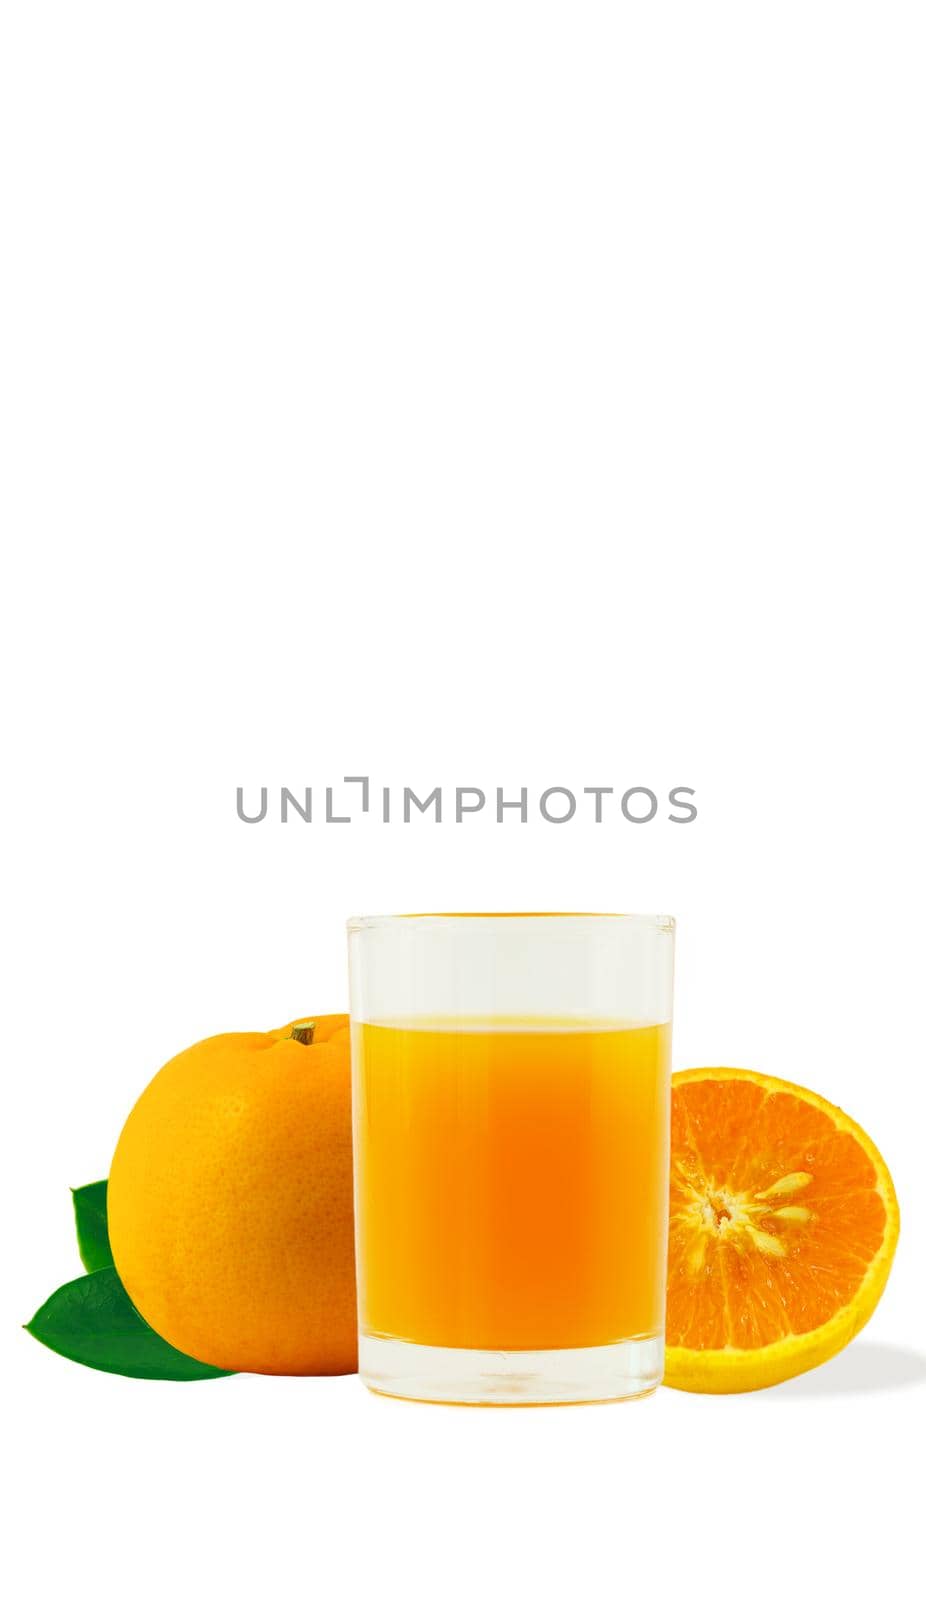 100% fresh-squeezed orange juice in a glass And citrus fruit split on white background. Concept of how to live with a naturally refreshing drink that contains vitamin C. by noppha80